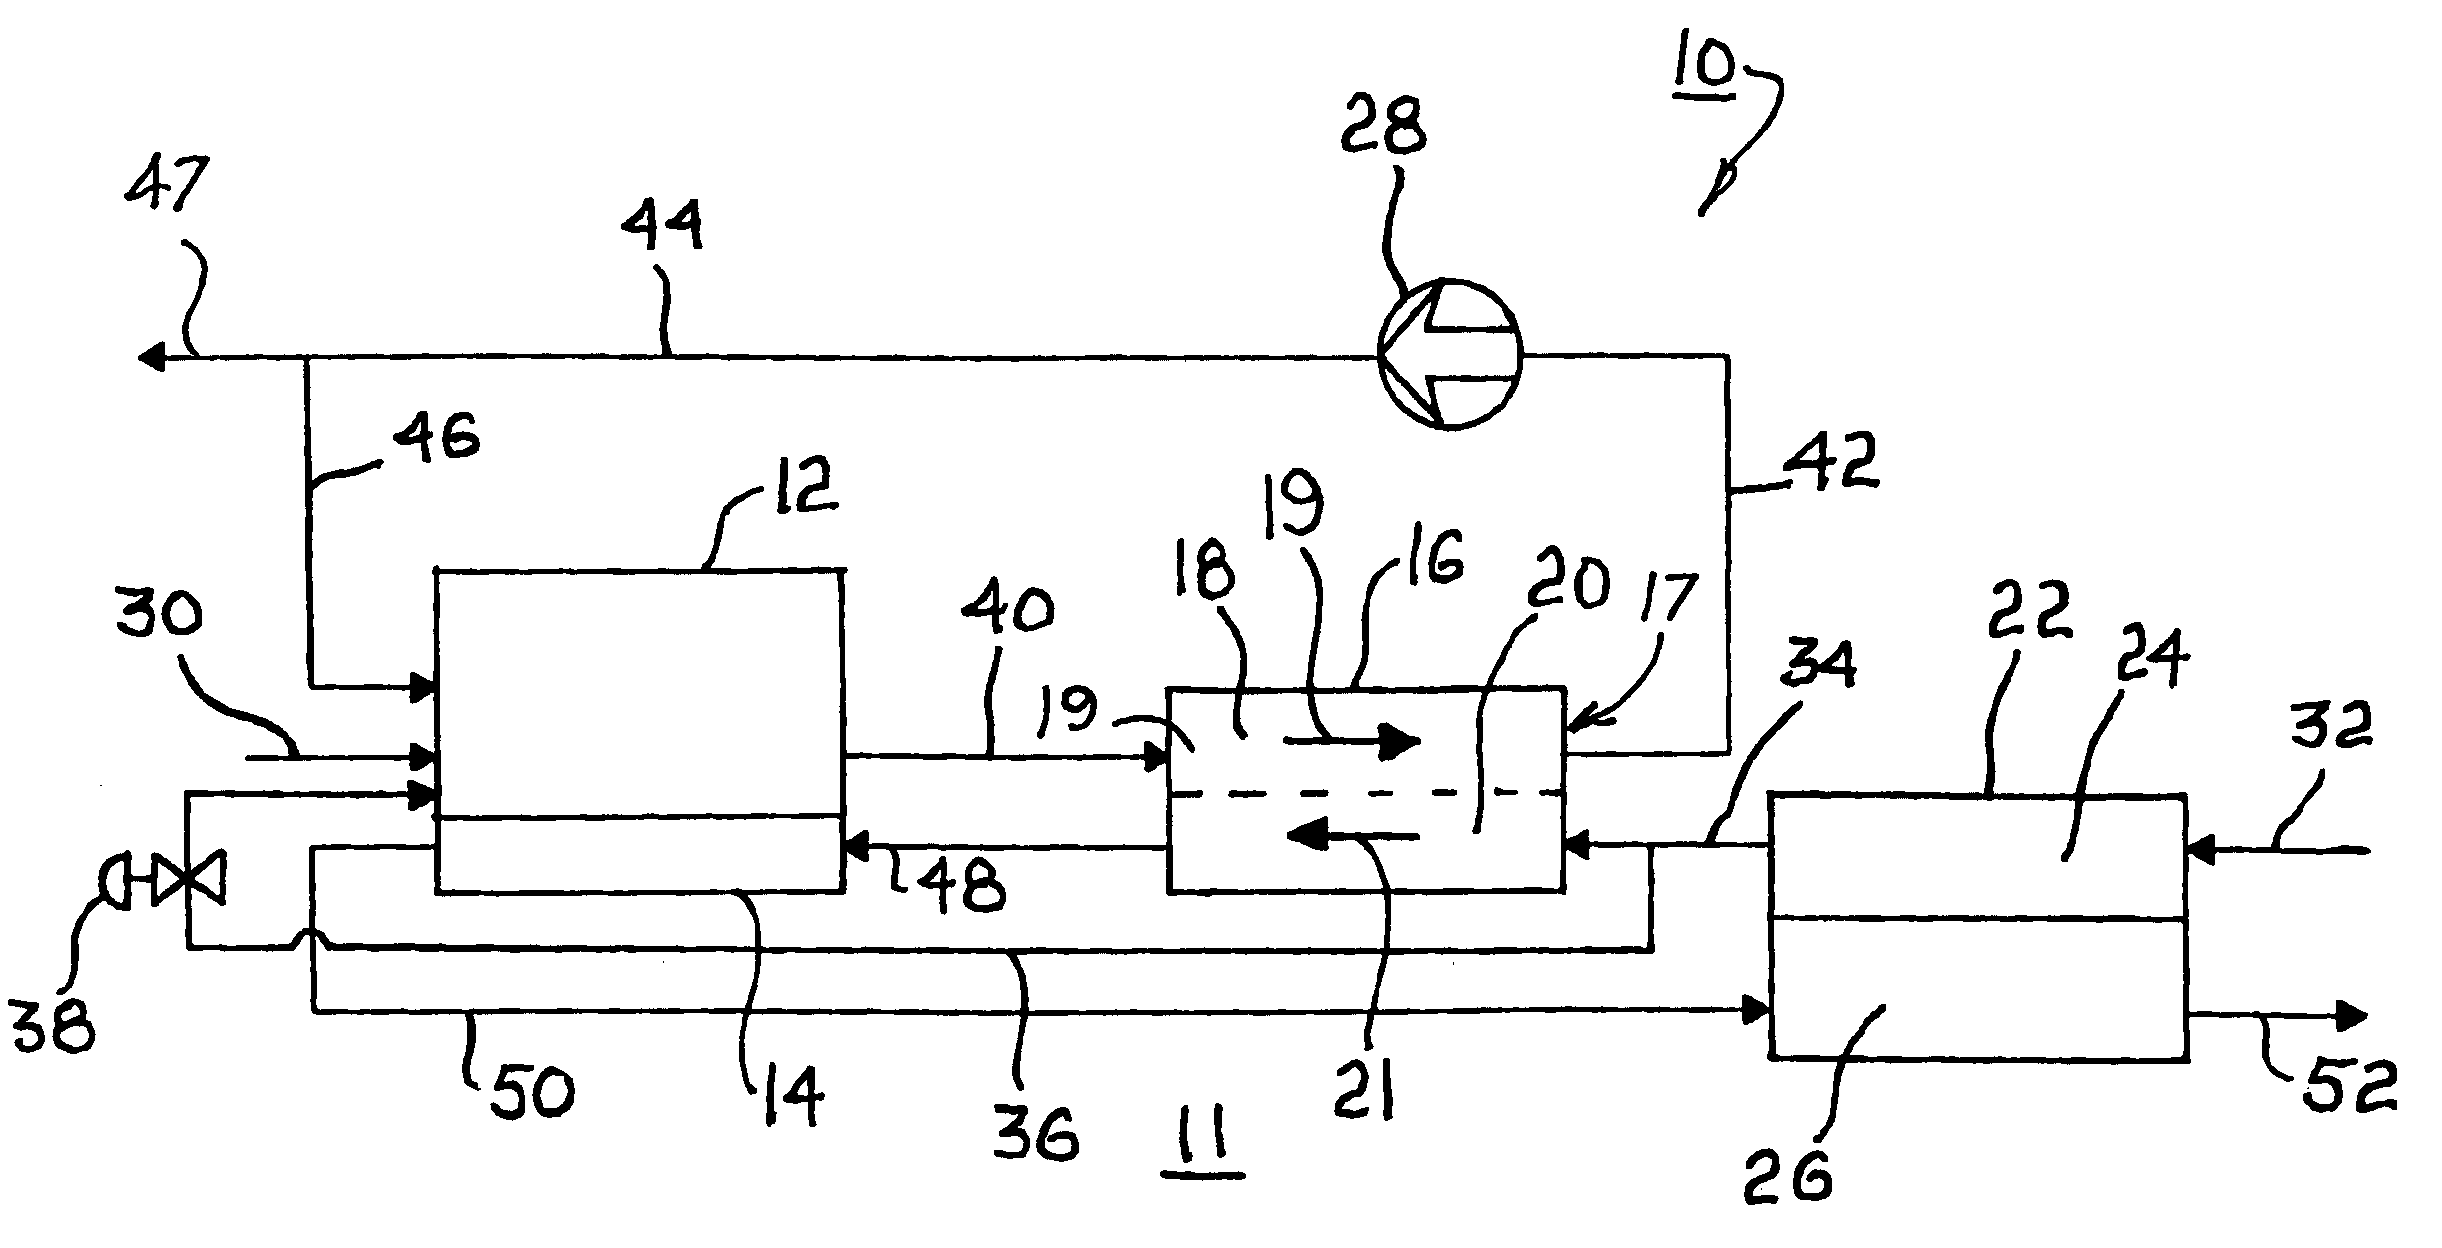 Apparatus and method for high efficiency operation of a high temperature fuel cell system